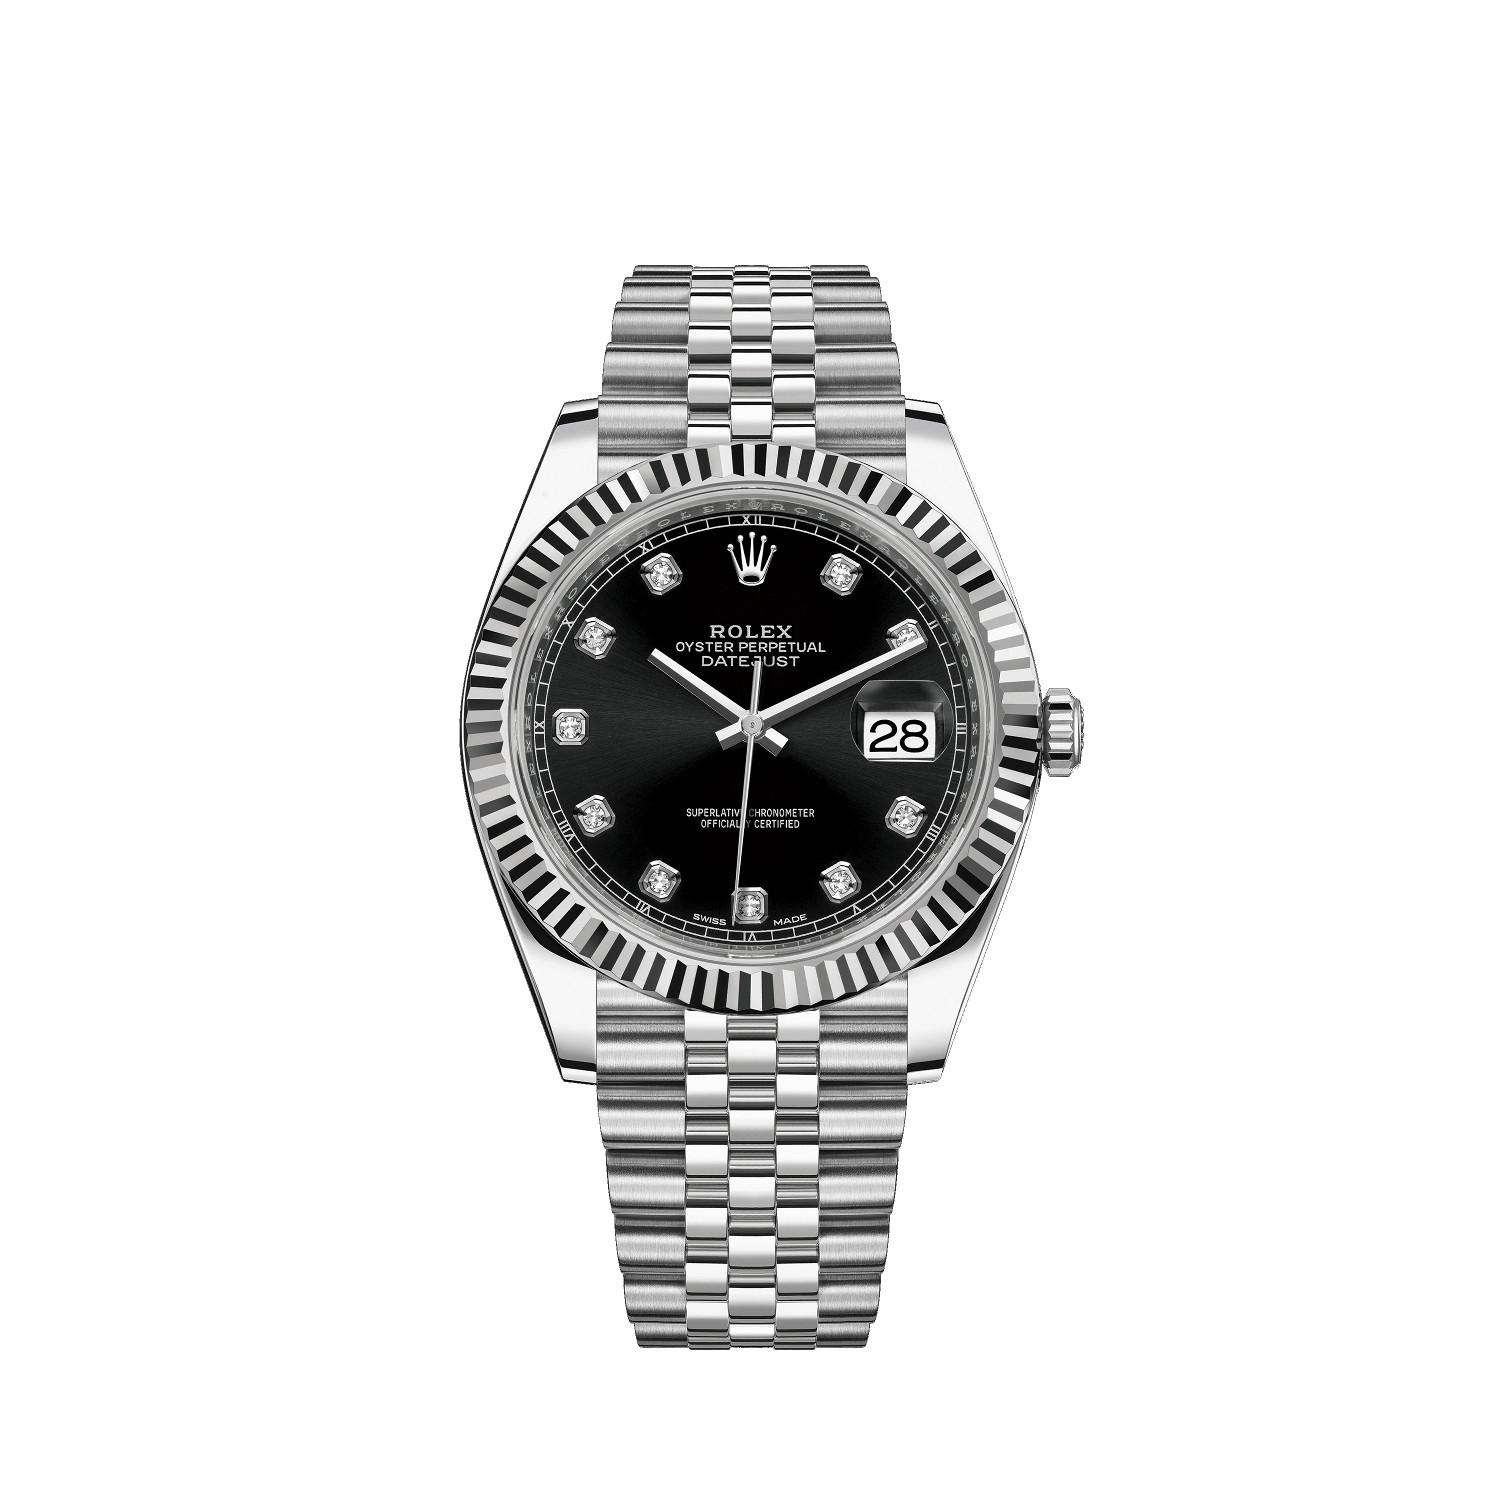 Datejust 41 126334 White Gold & Stainless Steel Watch (Black Set with Diamonds) - Click Image to Close